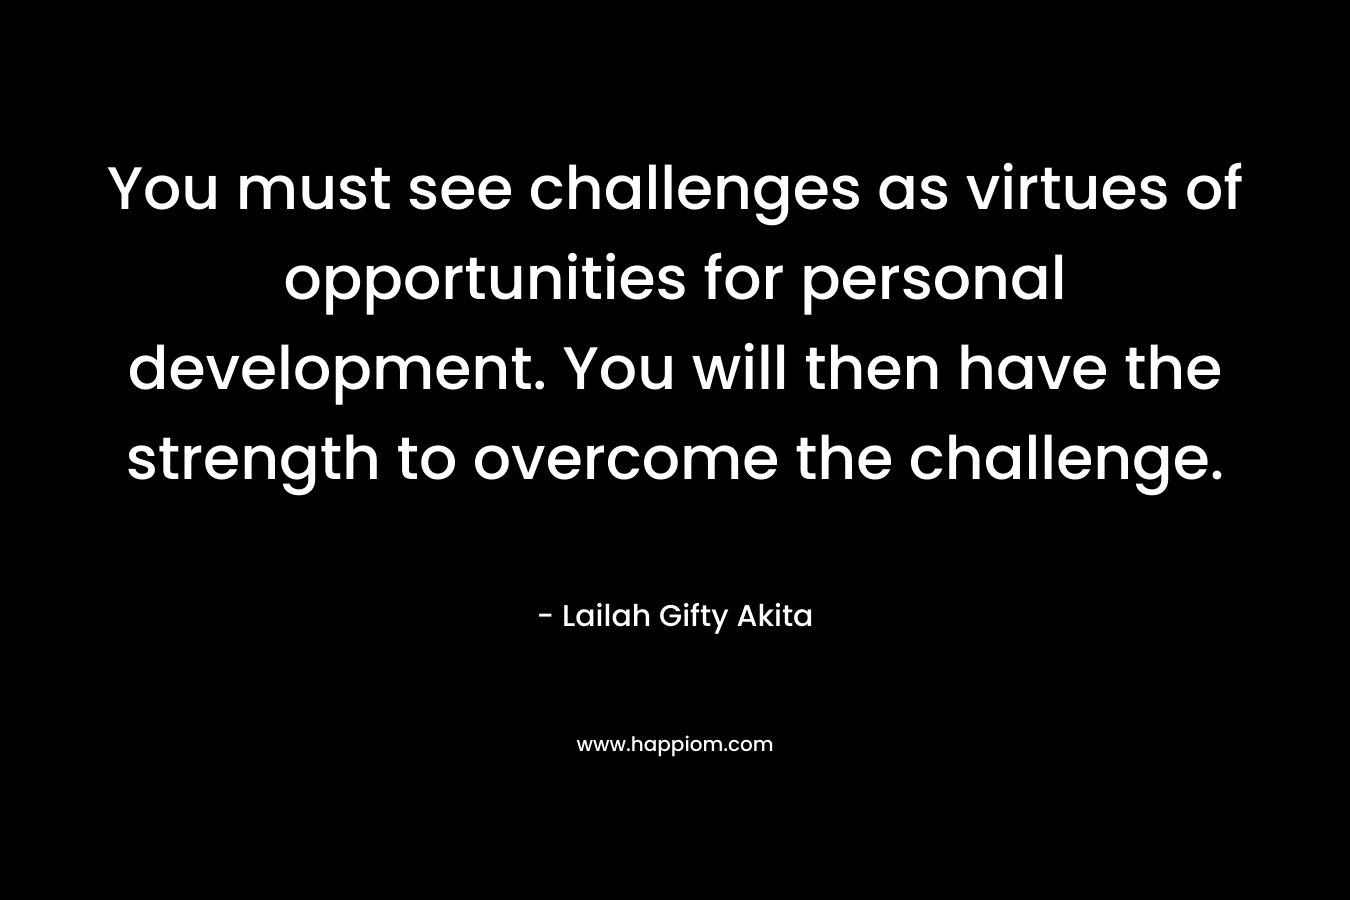 You must see challenges as virtues of opportunities for personal development. You will then have the strength to overcome the challenge.